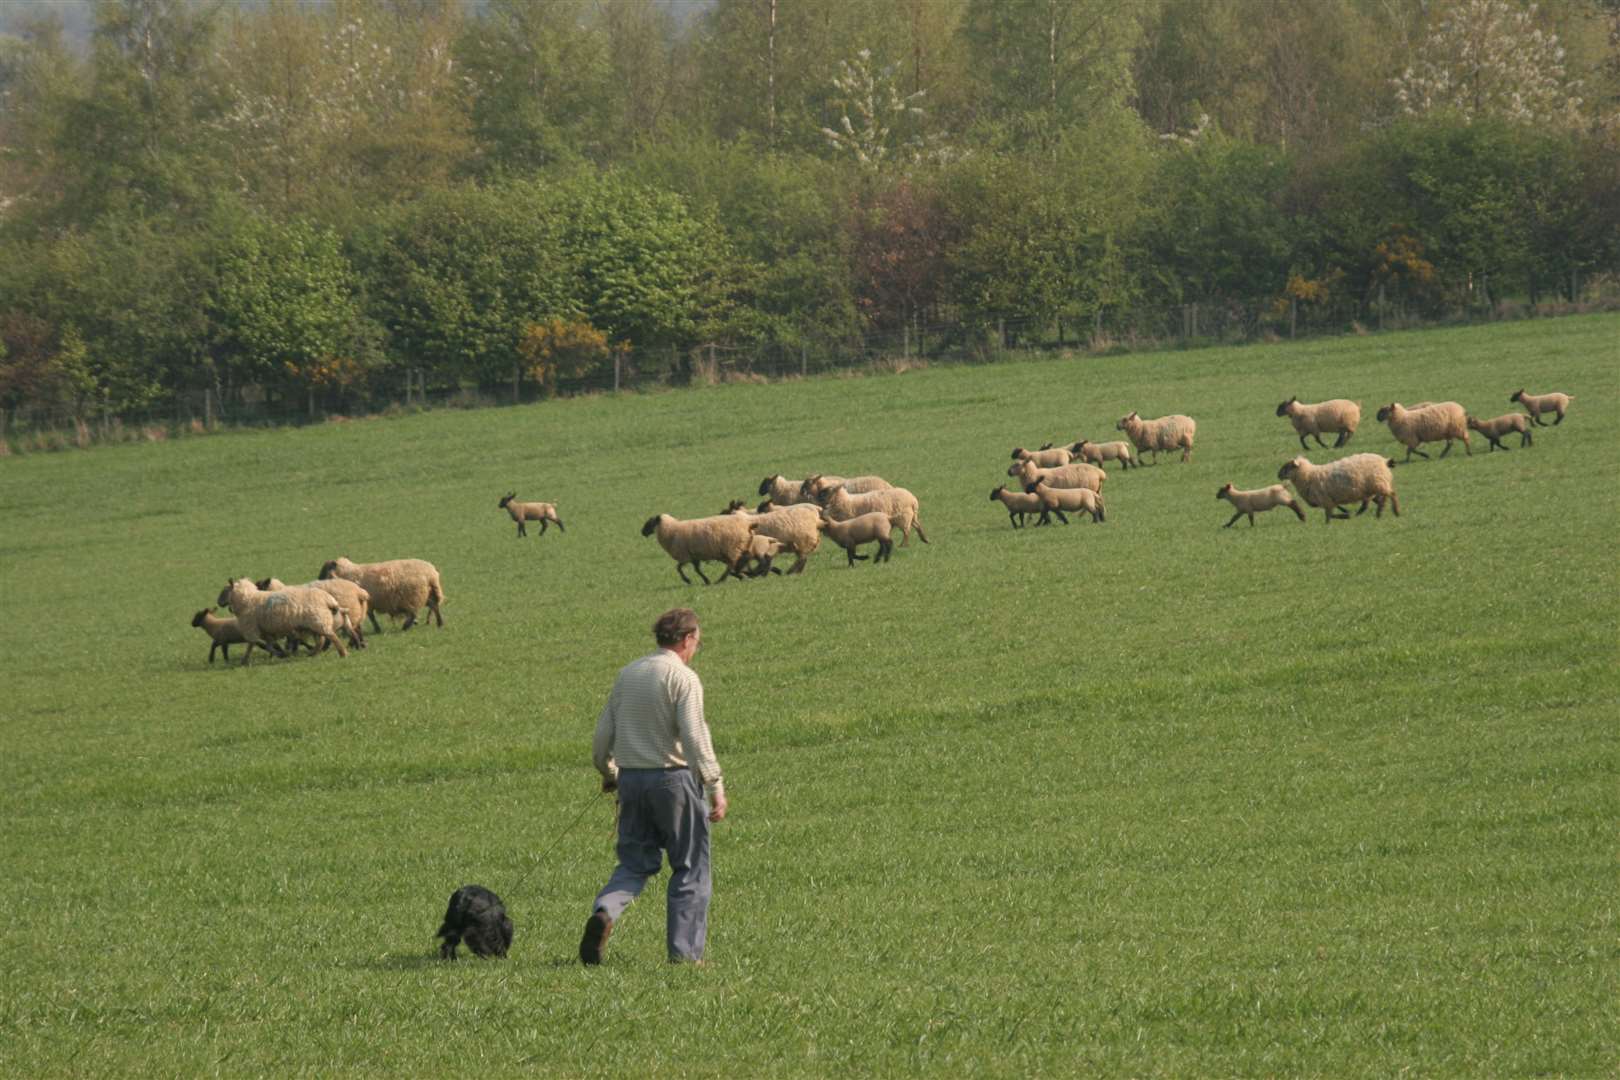 Dog walkers have been urged to keep their pets on leads while walking in rural areas.